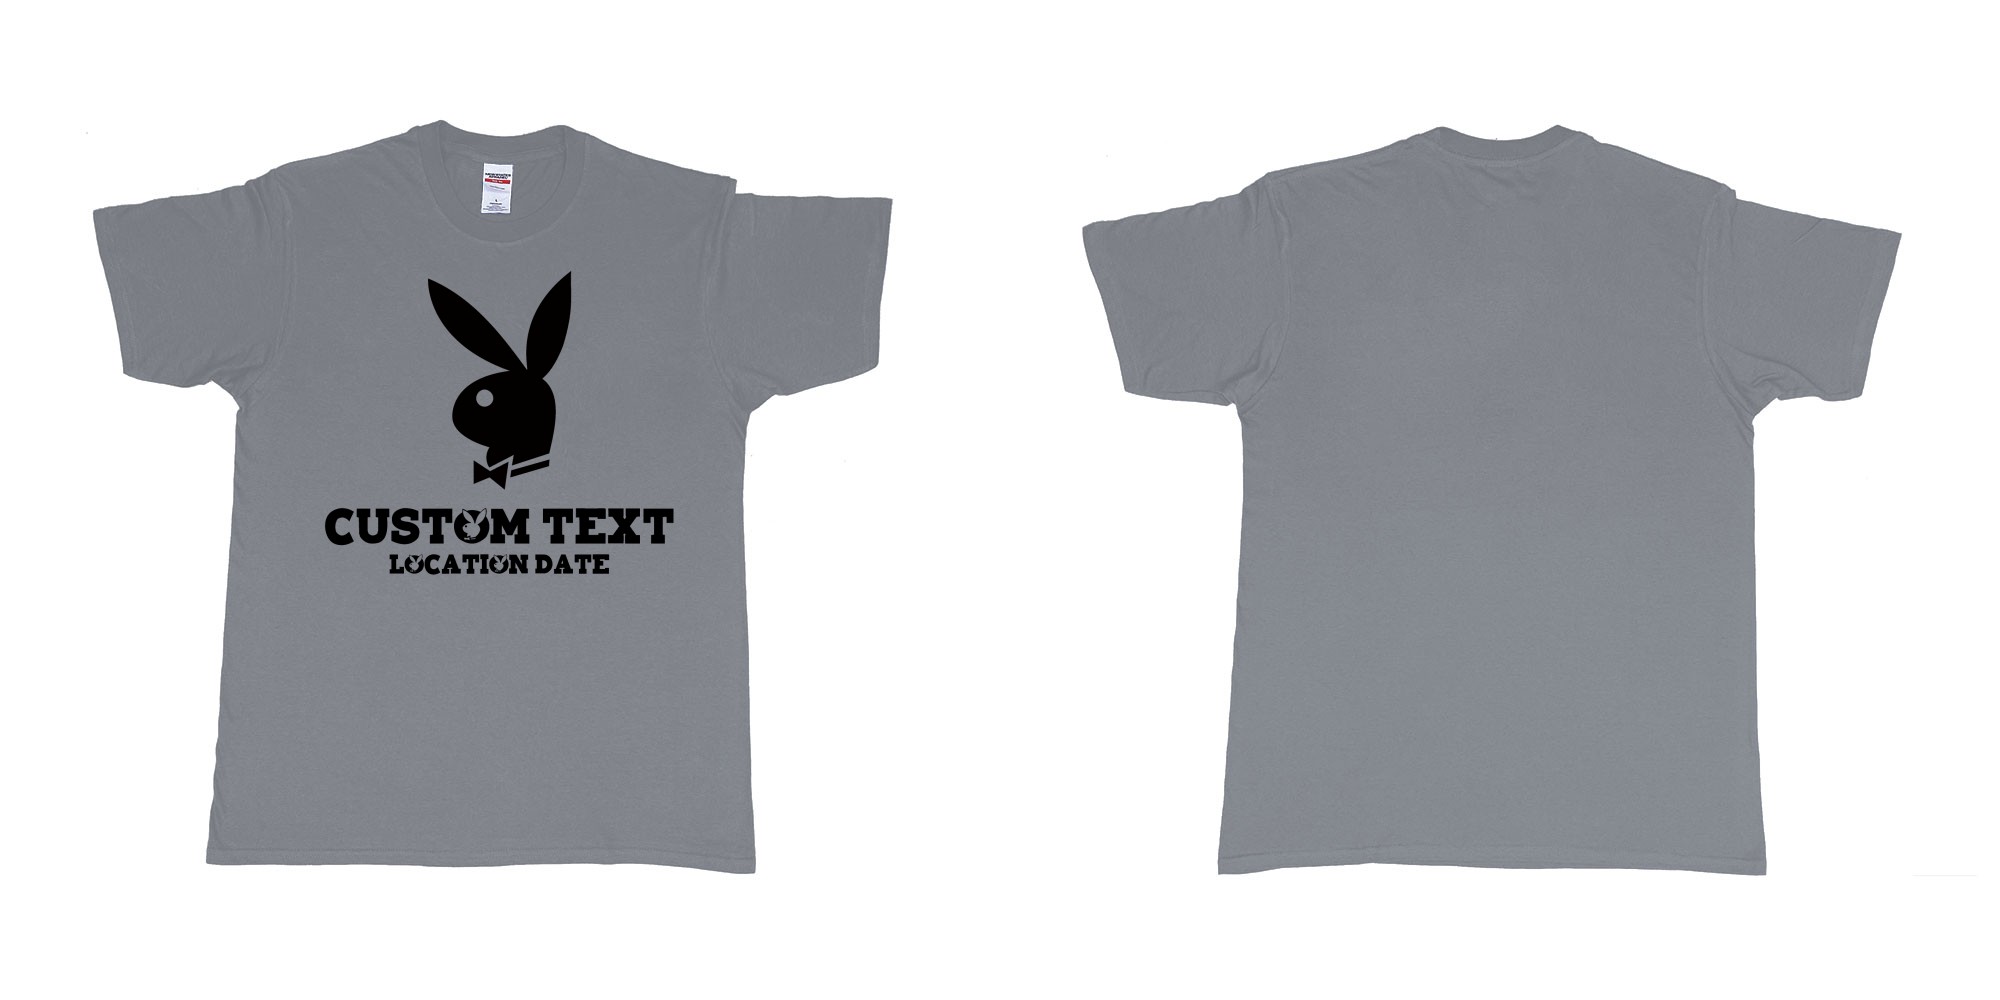 Custom tshirt design playboy playgirl custom text tshirt in fabric color misty choice your own text made in Bali by The Pirate Way